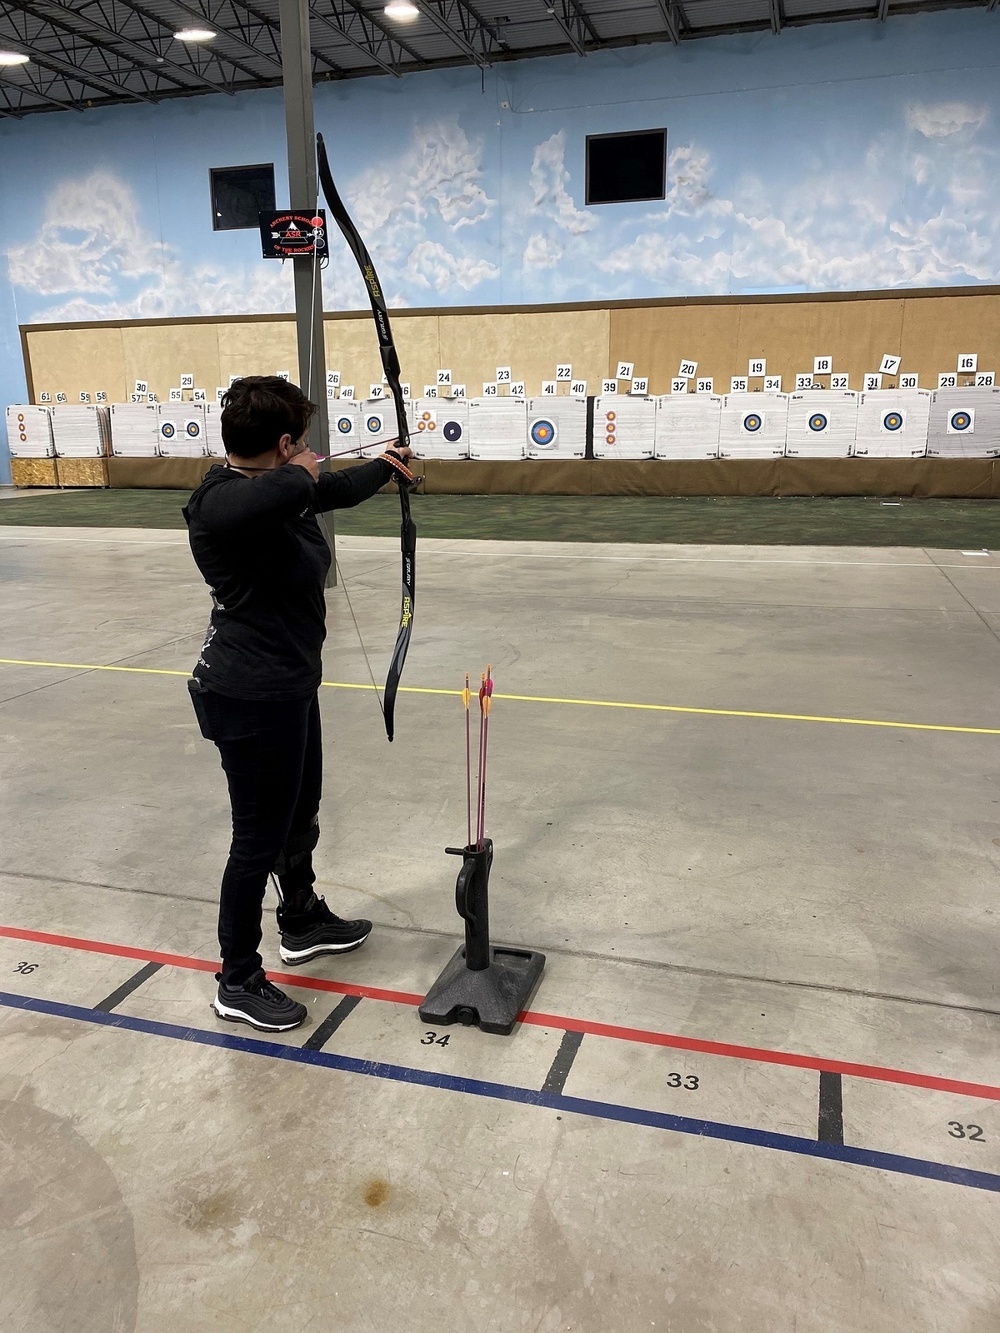 DVIDS - Images - Fort Carson Soldier competes in 2021 Army Trials as part of recovery journey